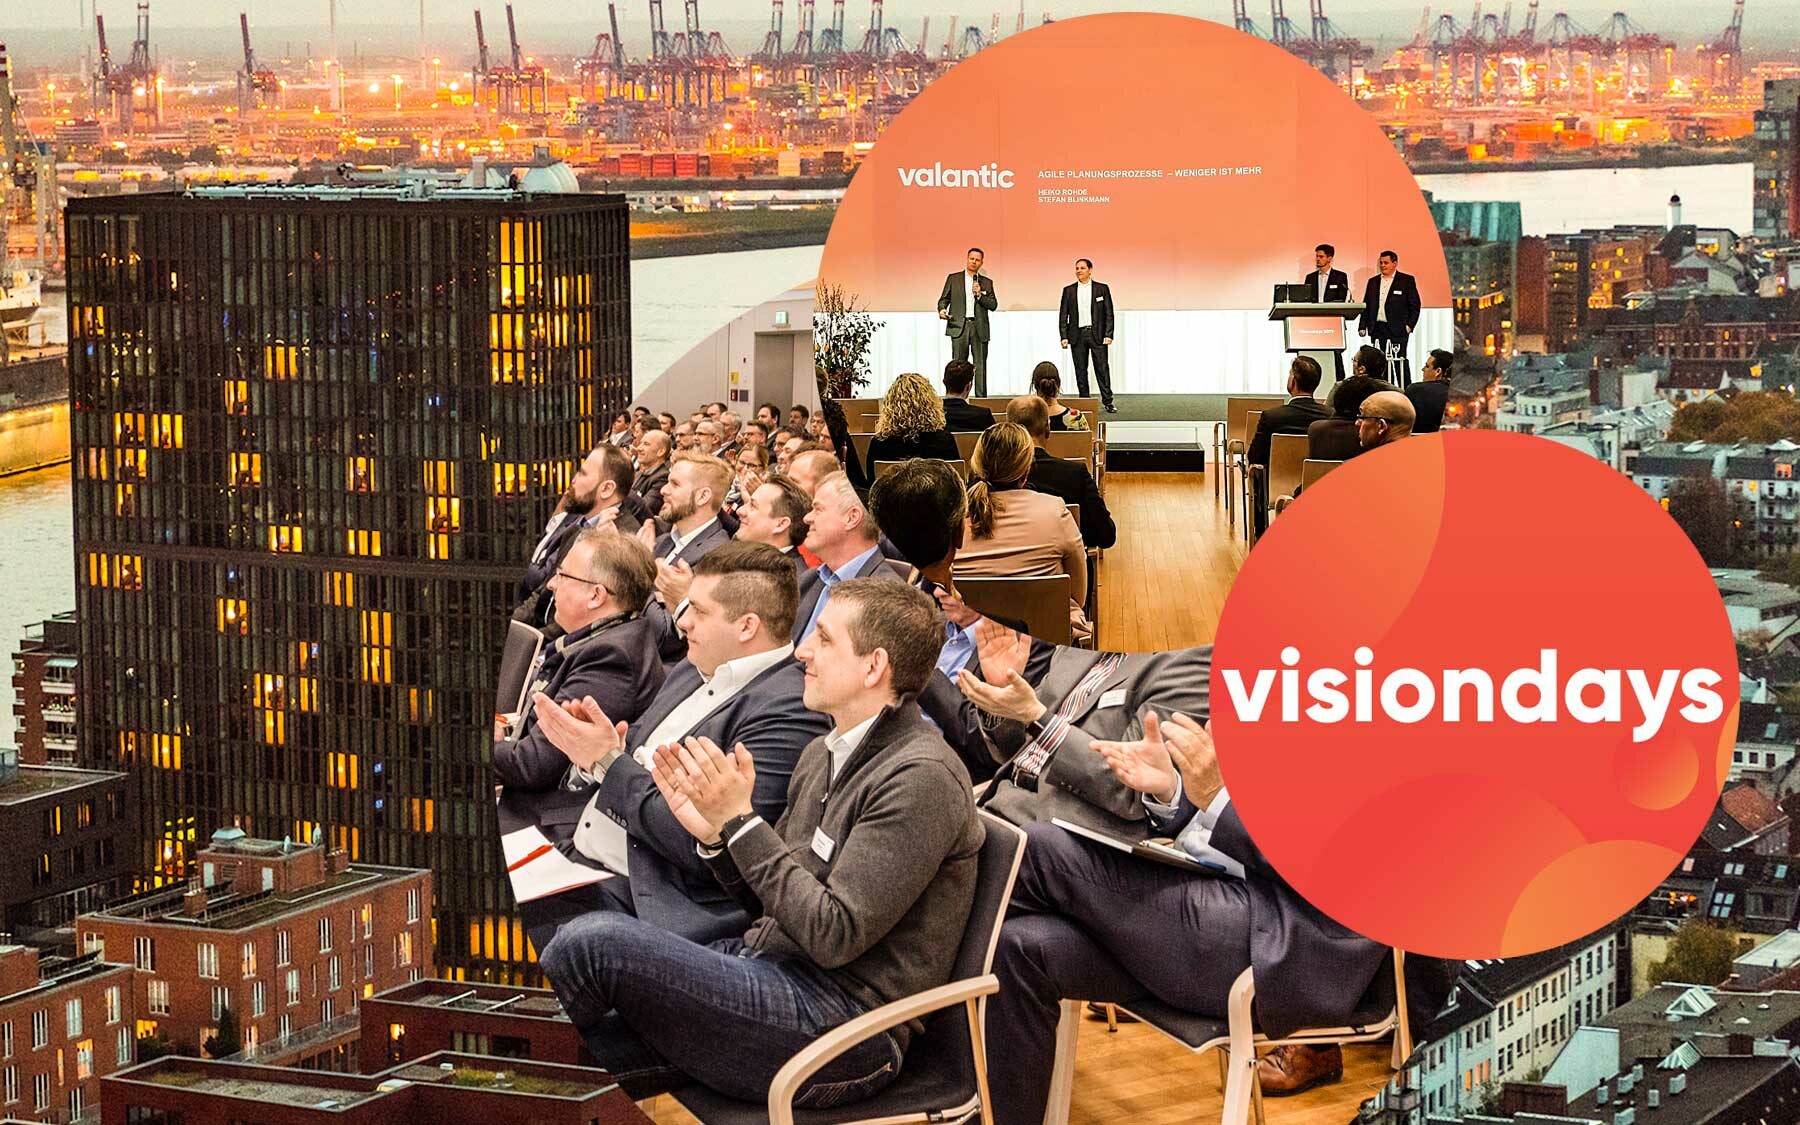 Image of the visiondays logo and people sitting in a conference room